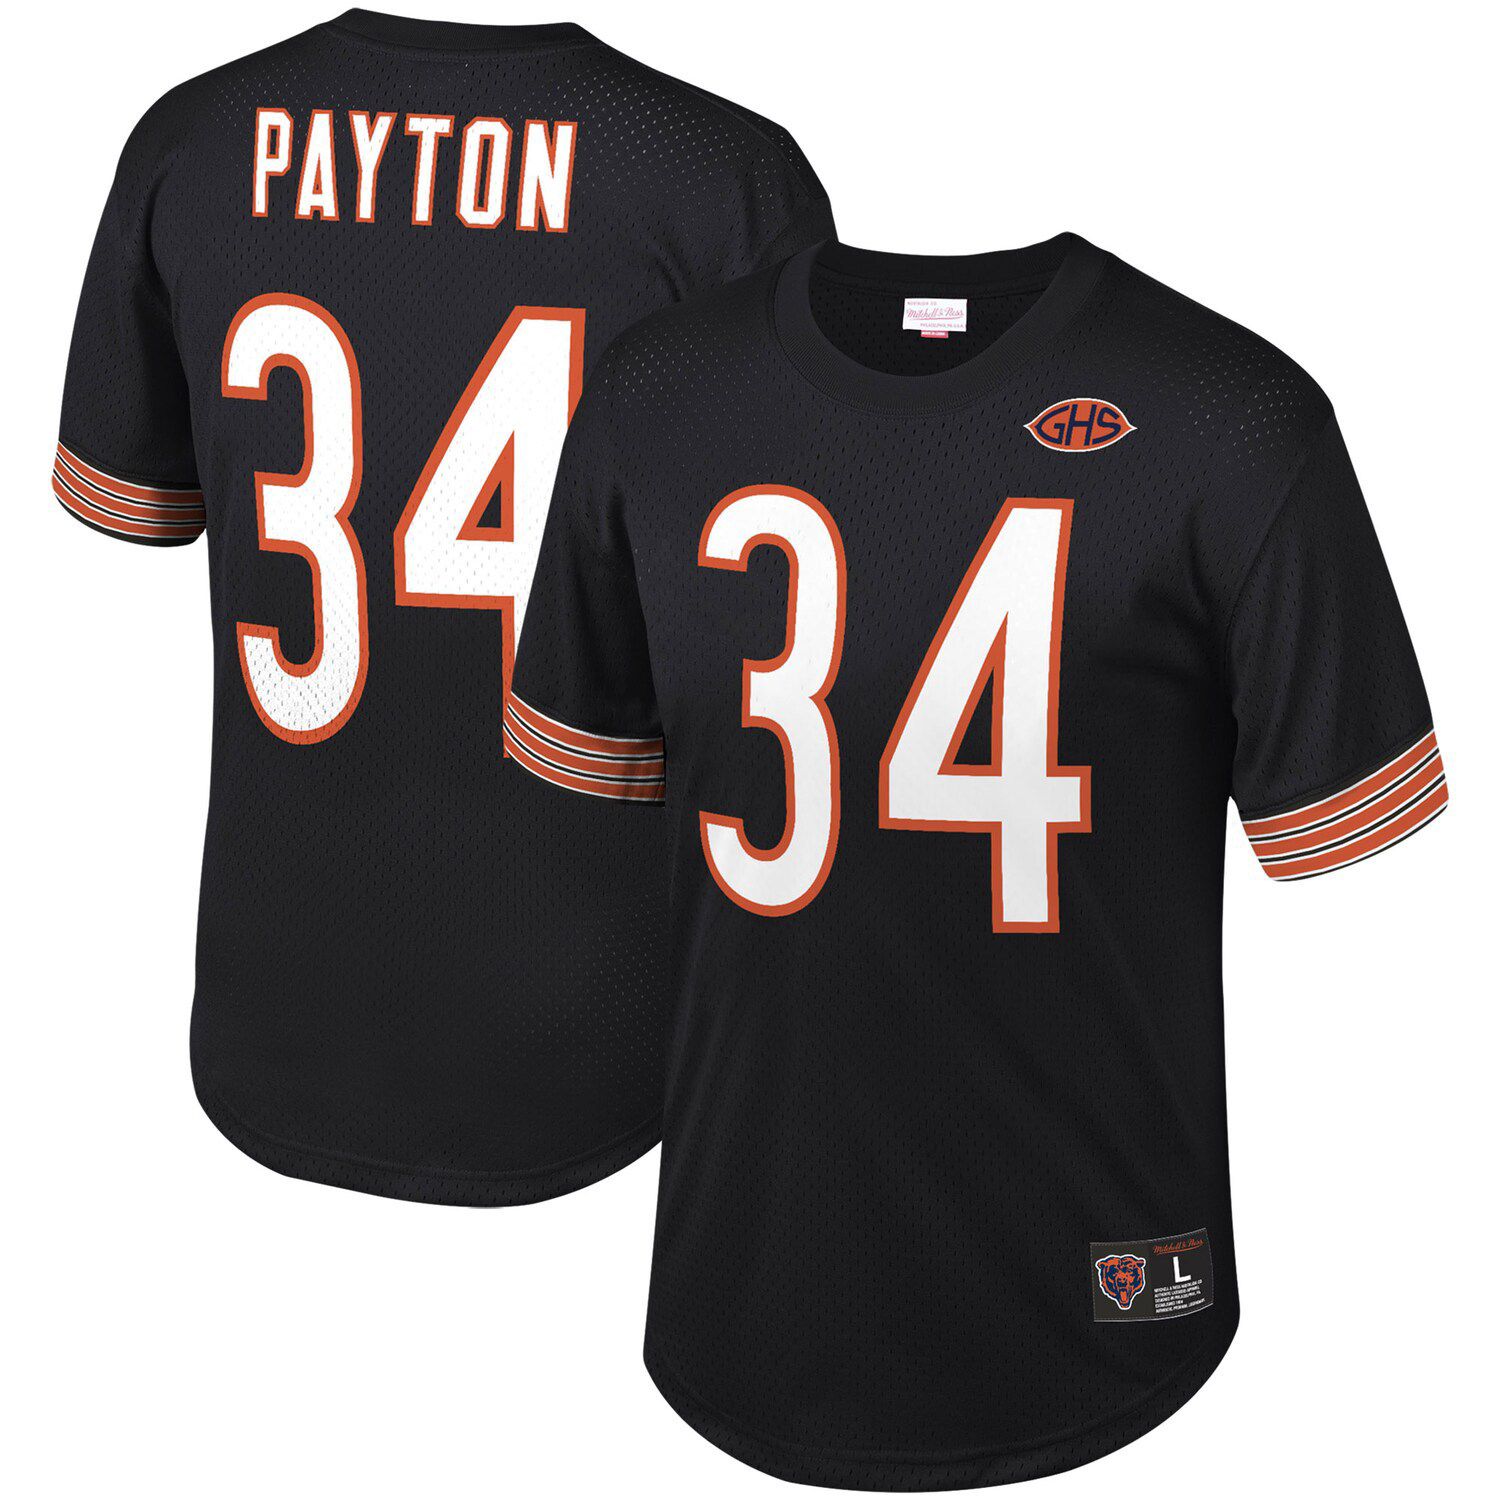 Image for Unbranded Men's Mitchell & Ness Walter Payton Black Chicago Bears Retired Player Name & Number Mesh Top at Kohl's.